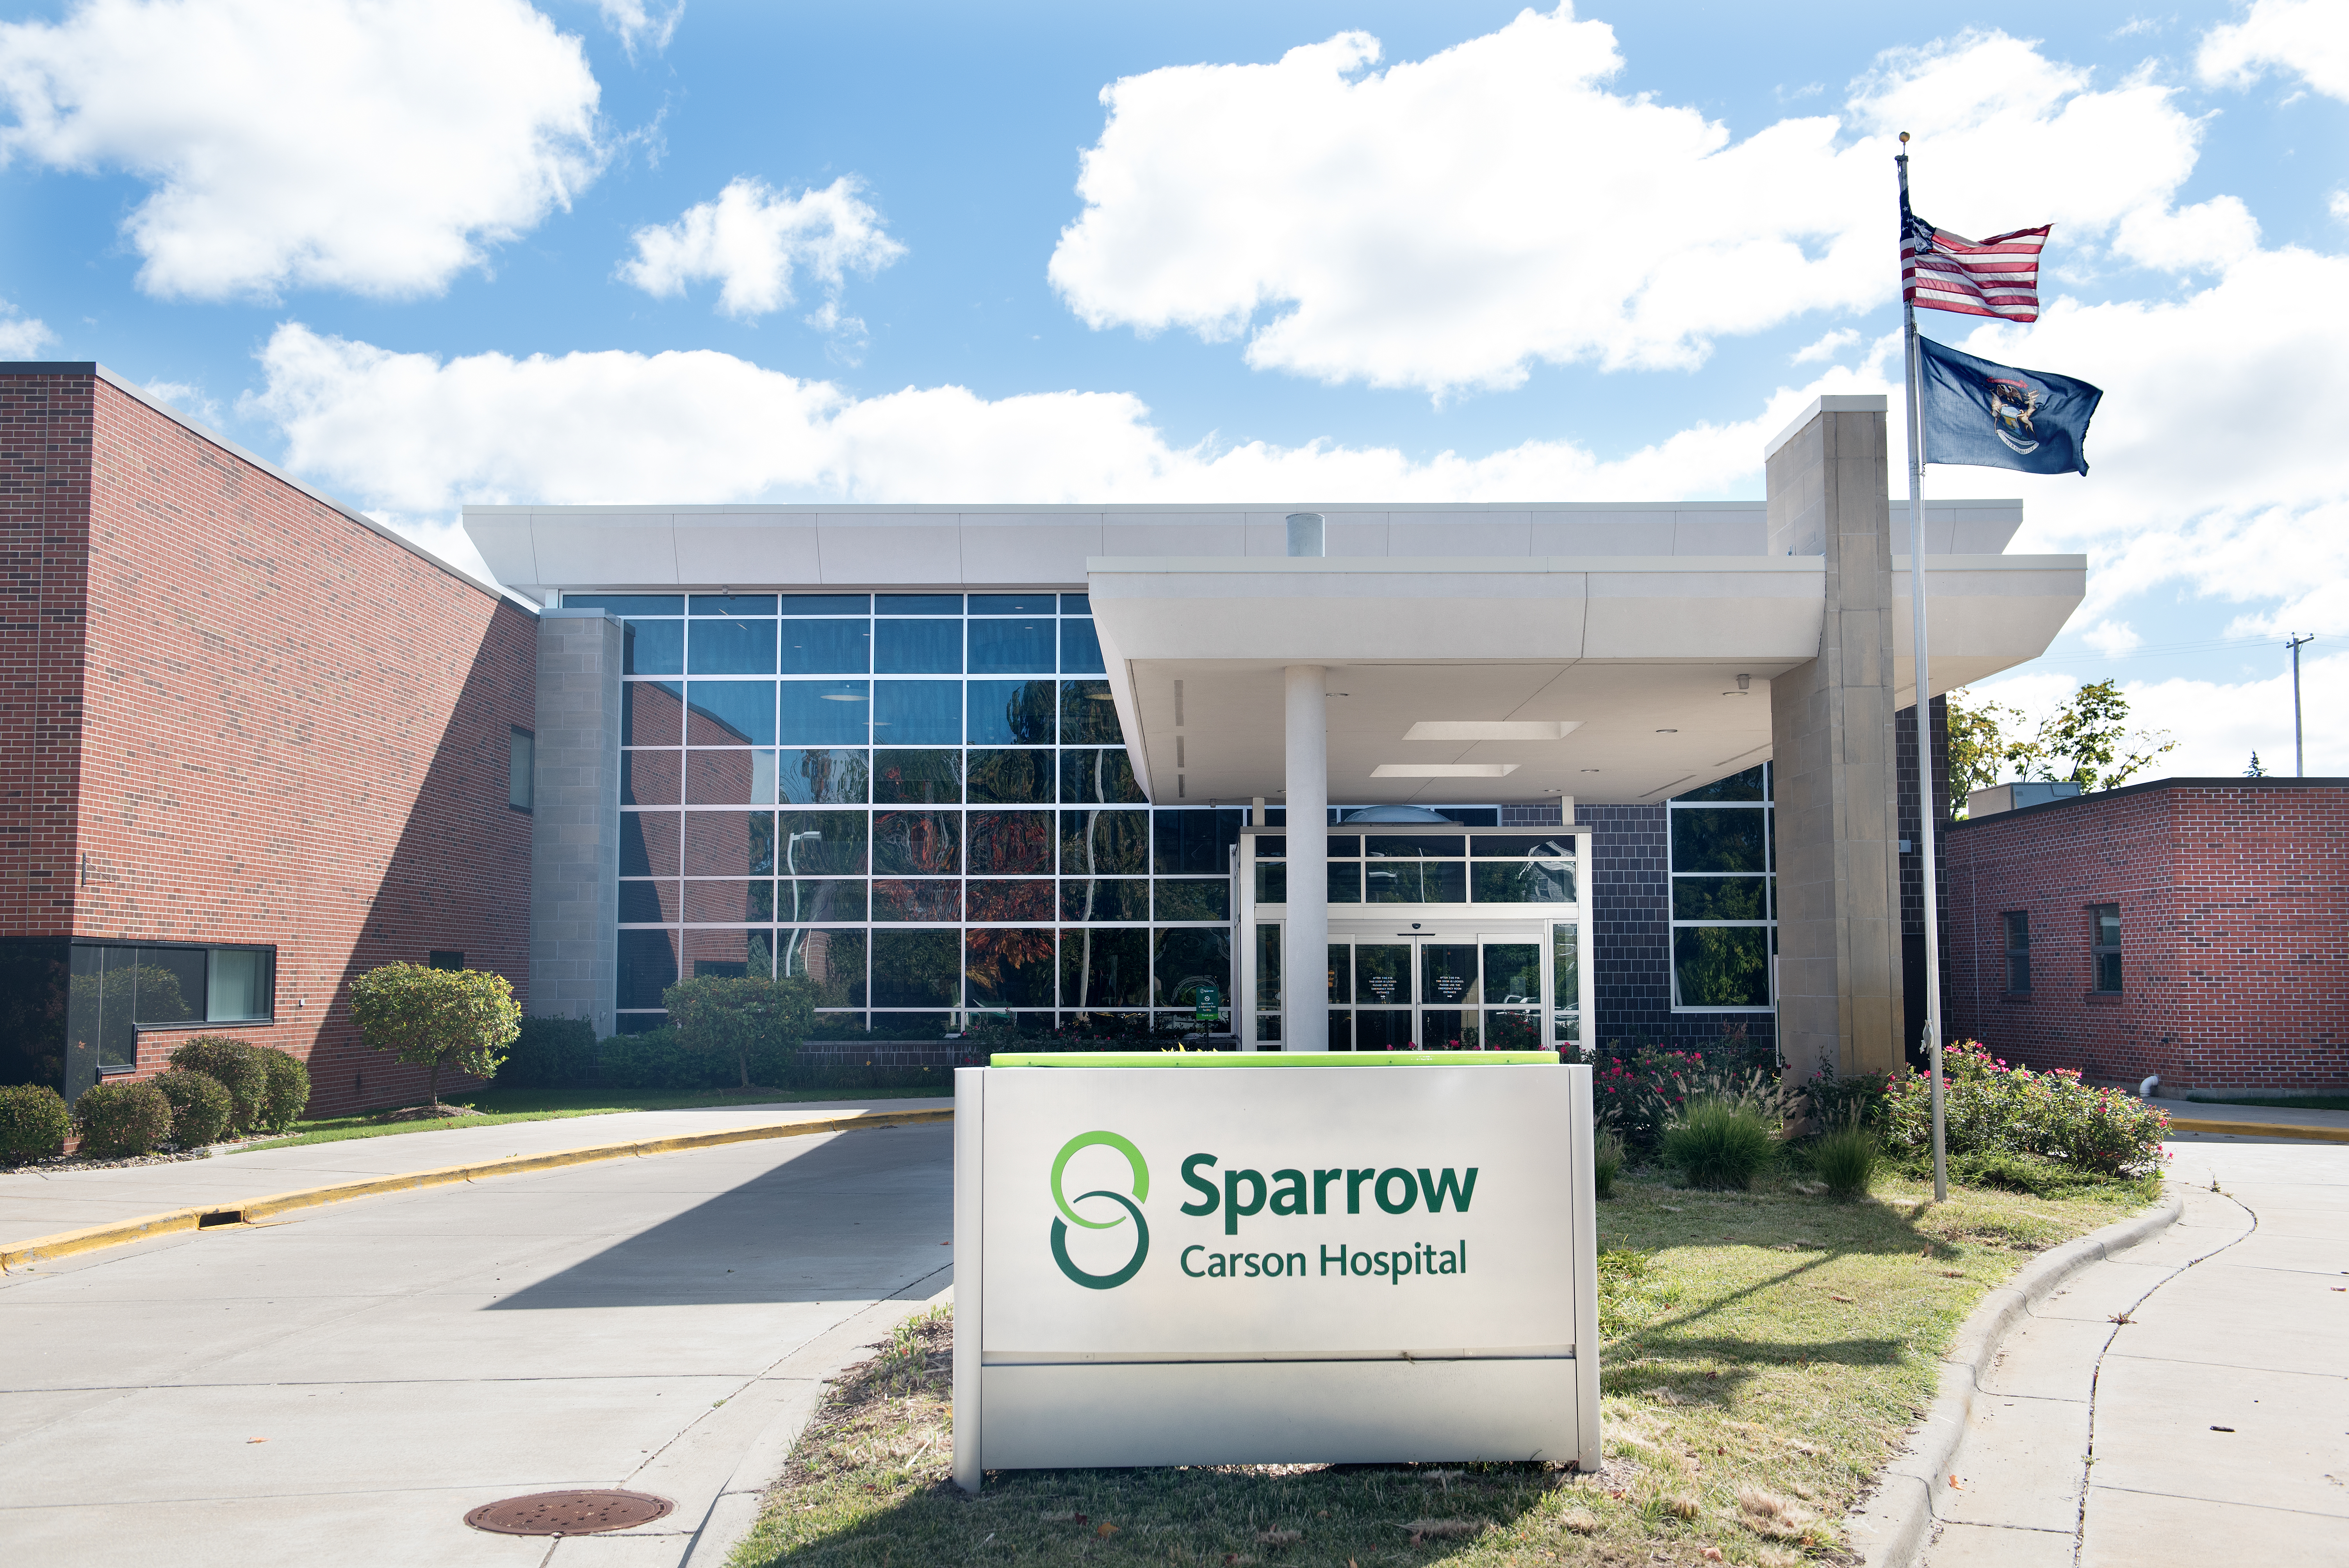 Sparrow Carson Hospital Laboratory receives national recognition